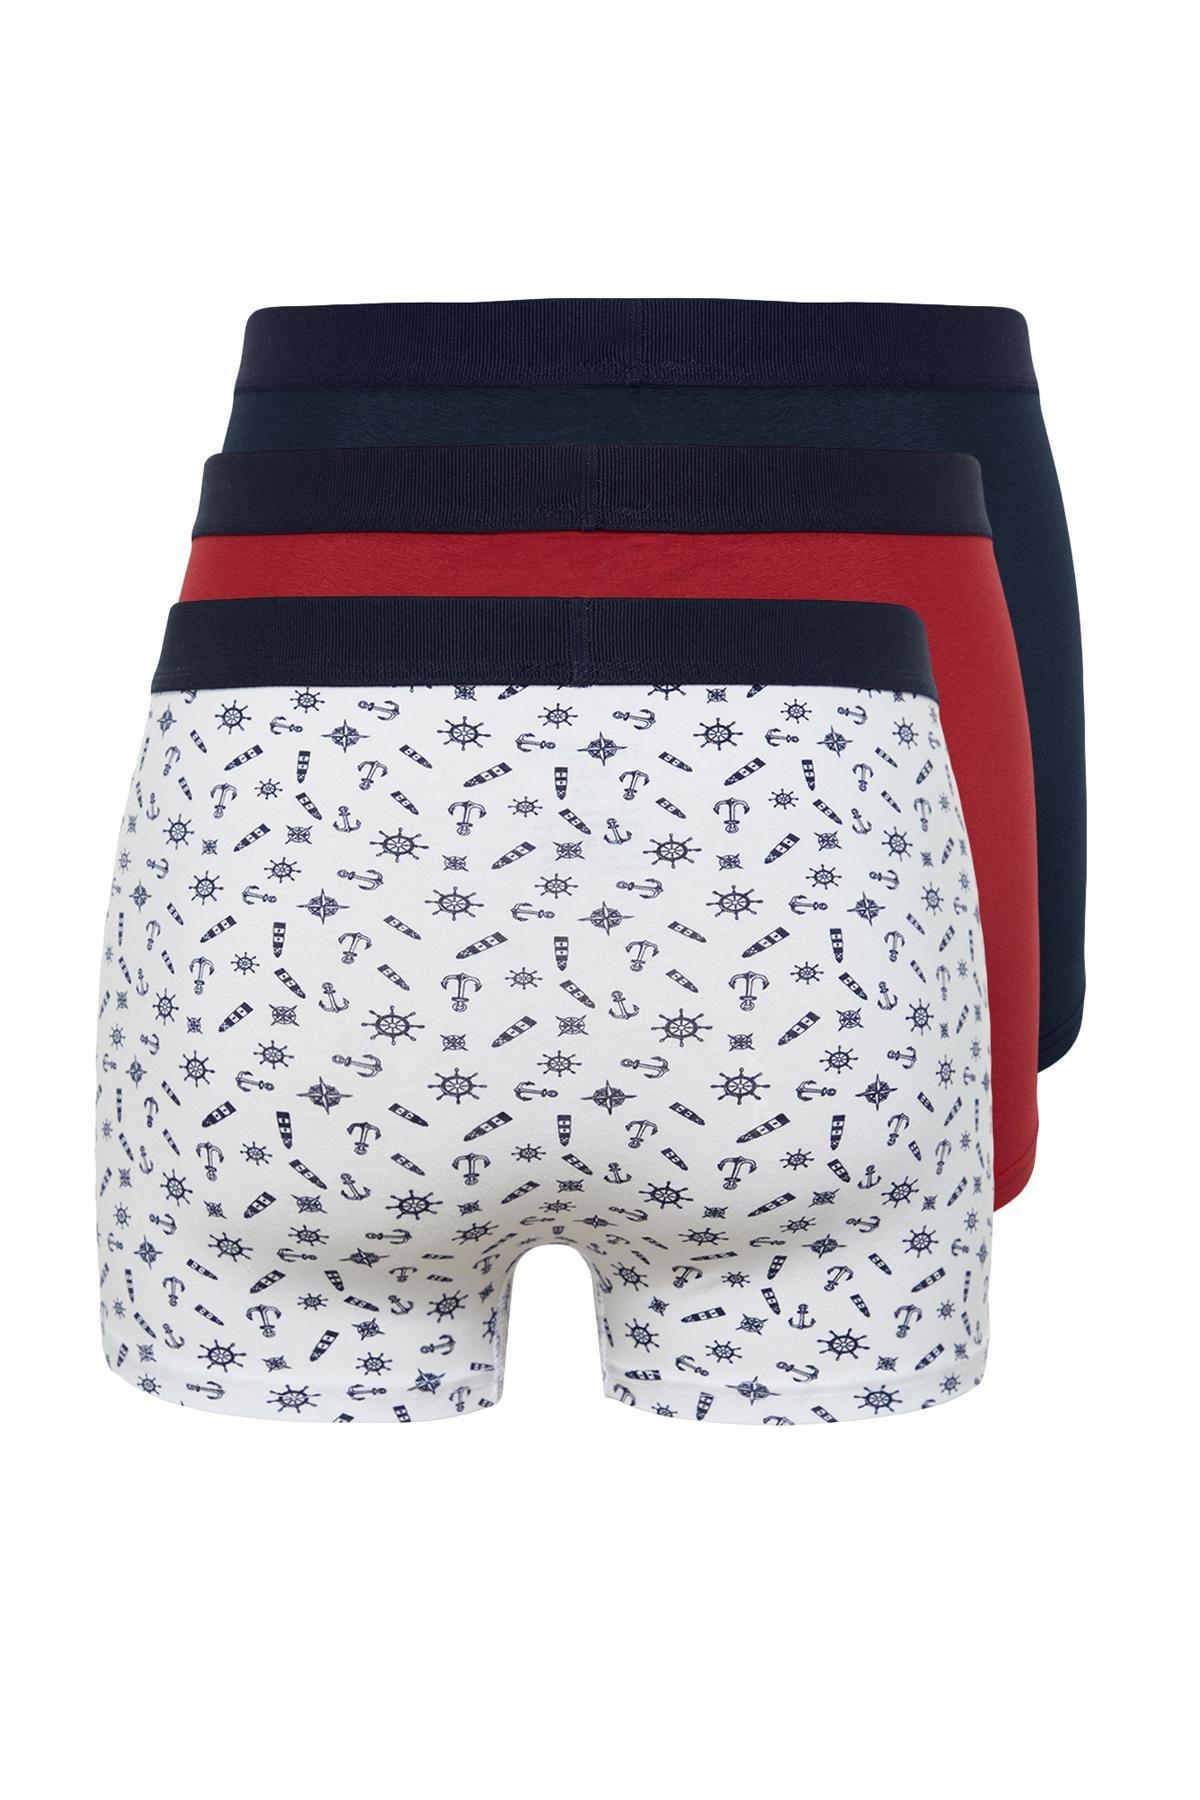 Trendyol - Multicolour Patterned Boxers , Set Of 3